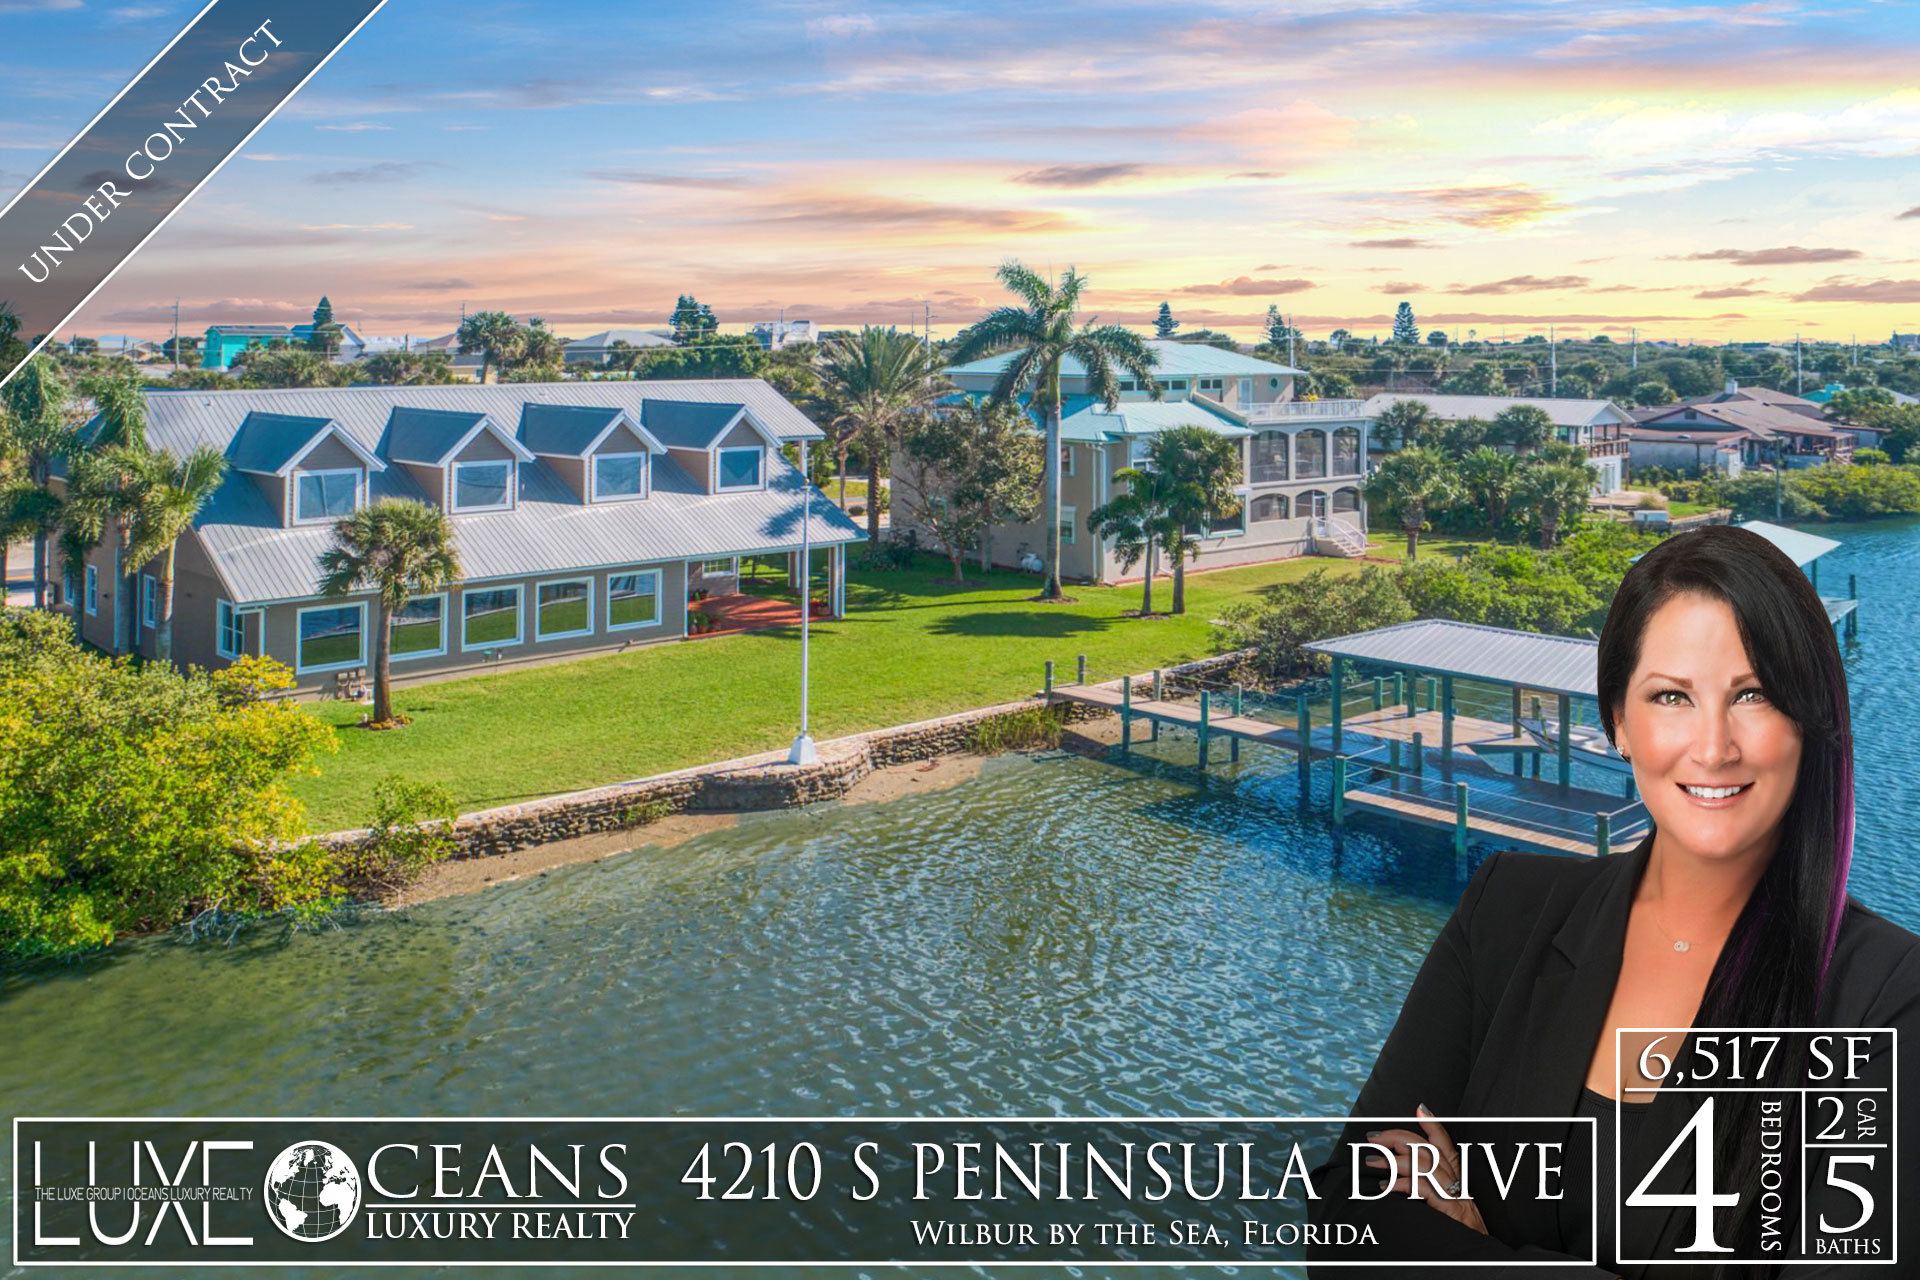 Ponce Inlet Homes For Sale. Luxury Real Estate at 4210 S Peninsula Drive, Wilbur by the Sea, FL  Under Contract